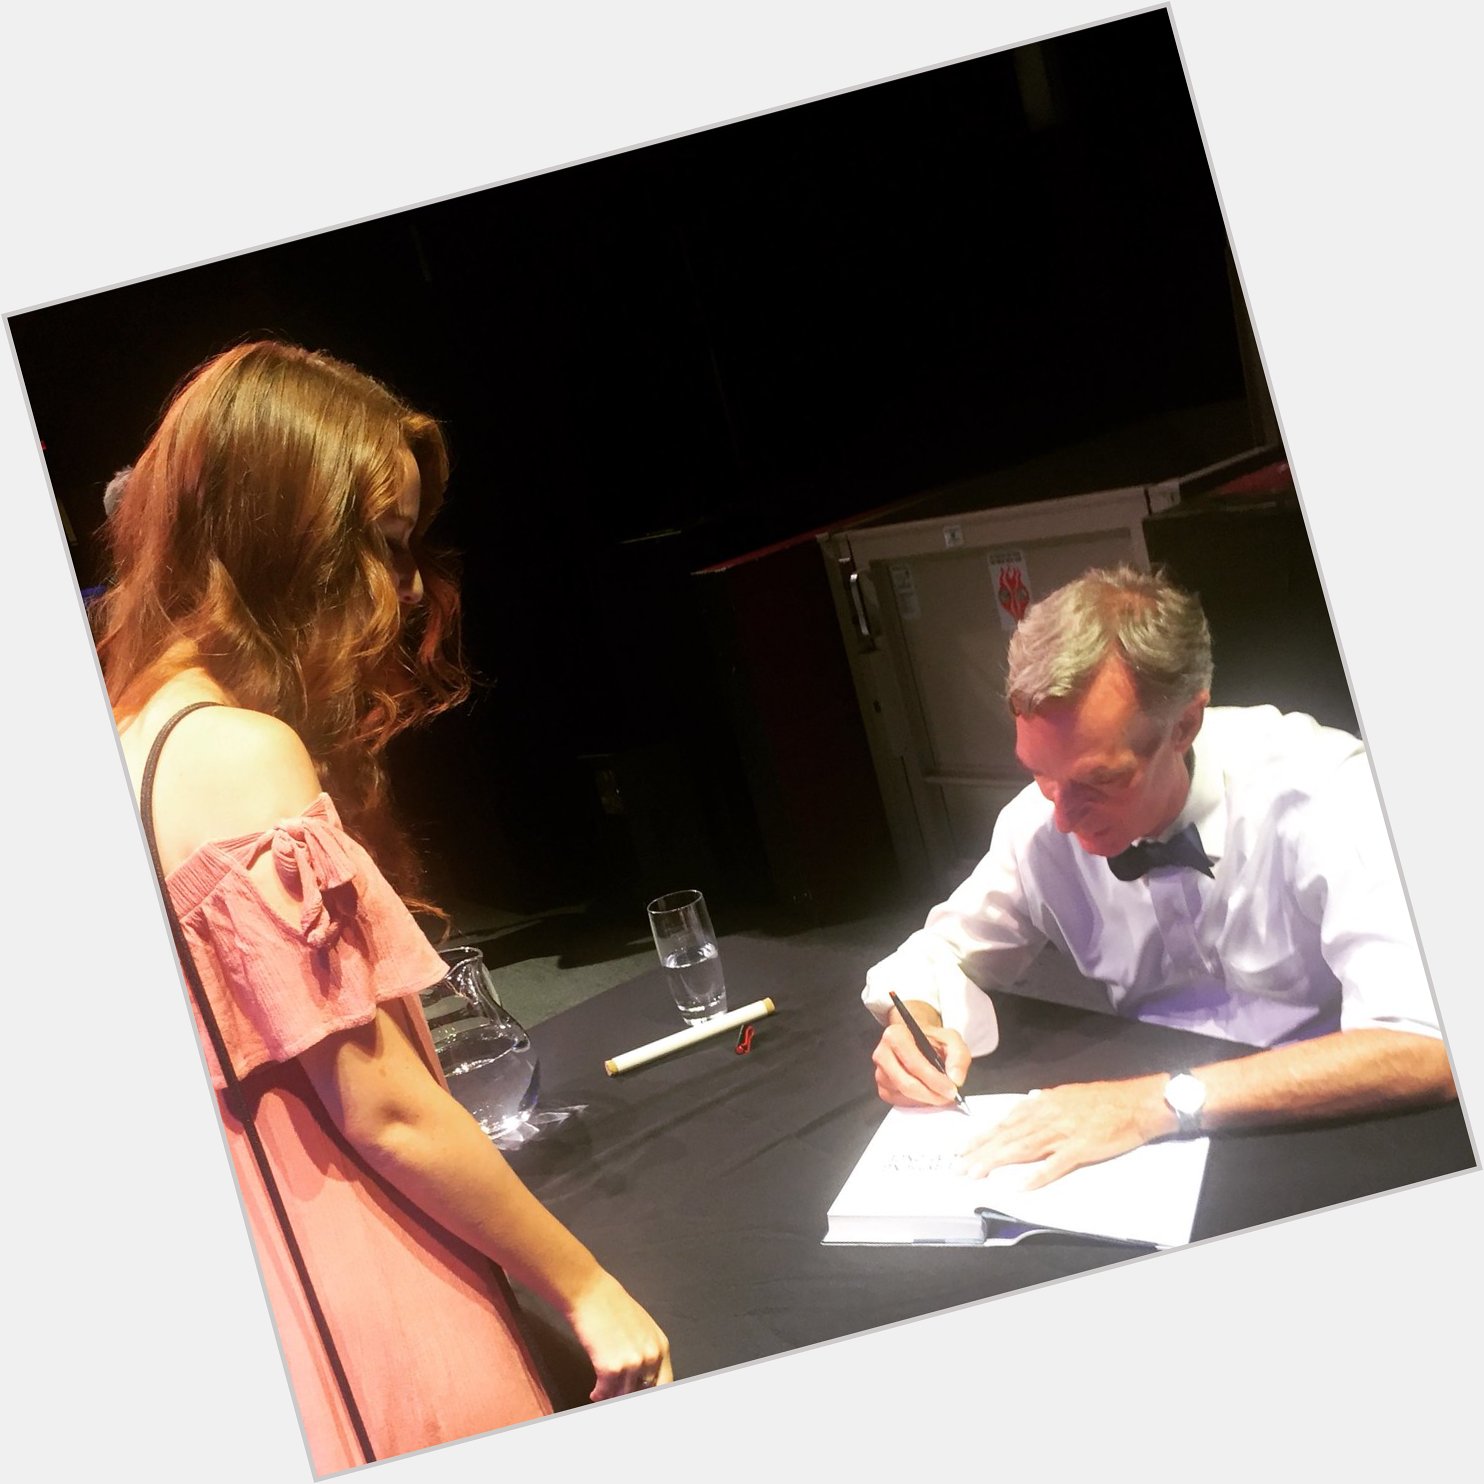 In honor of Bill Nye s bday here s a pic from the 5th time I met him. Happy birthday to the loml   